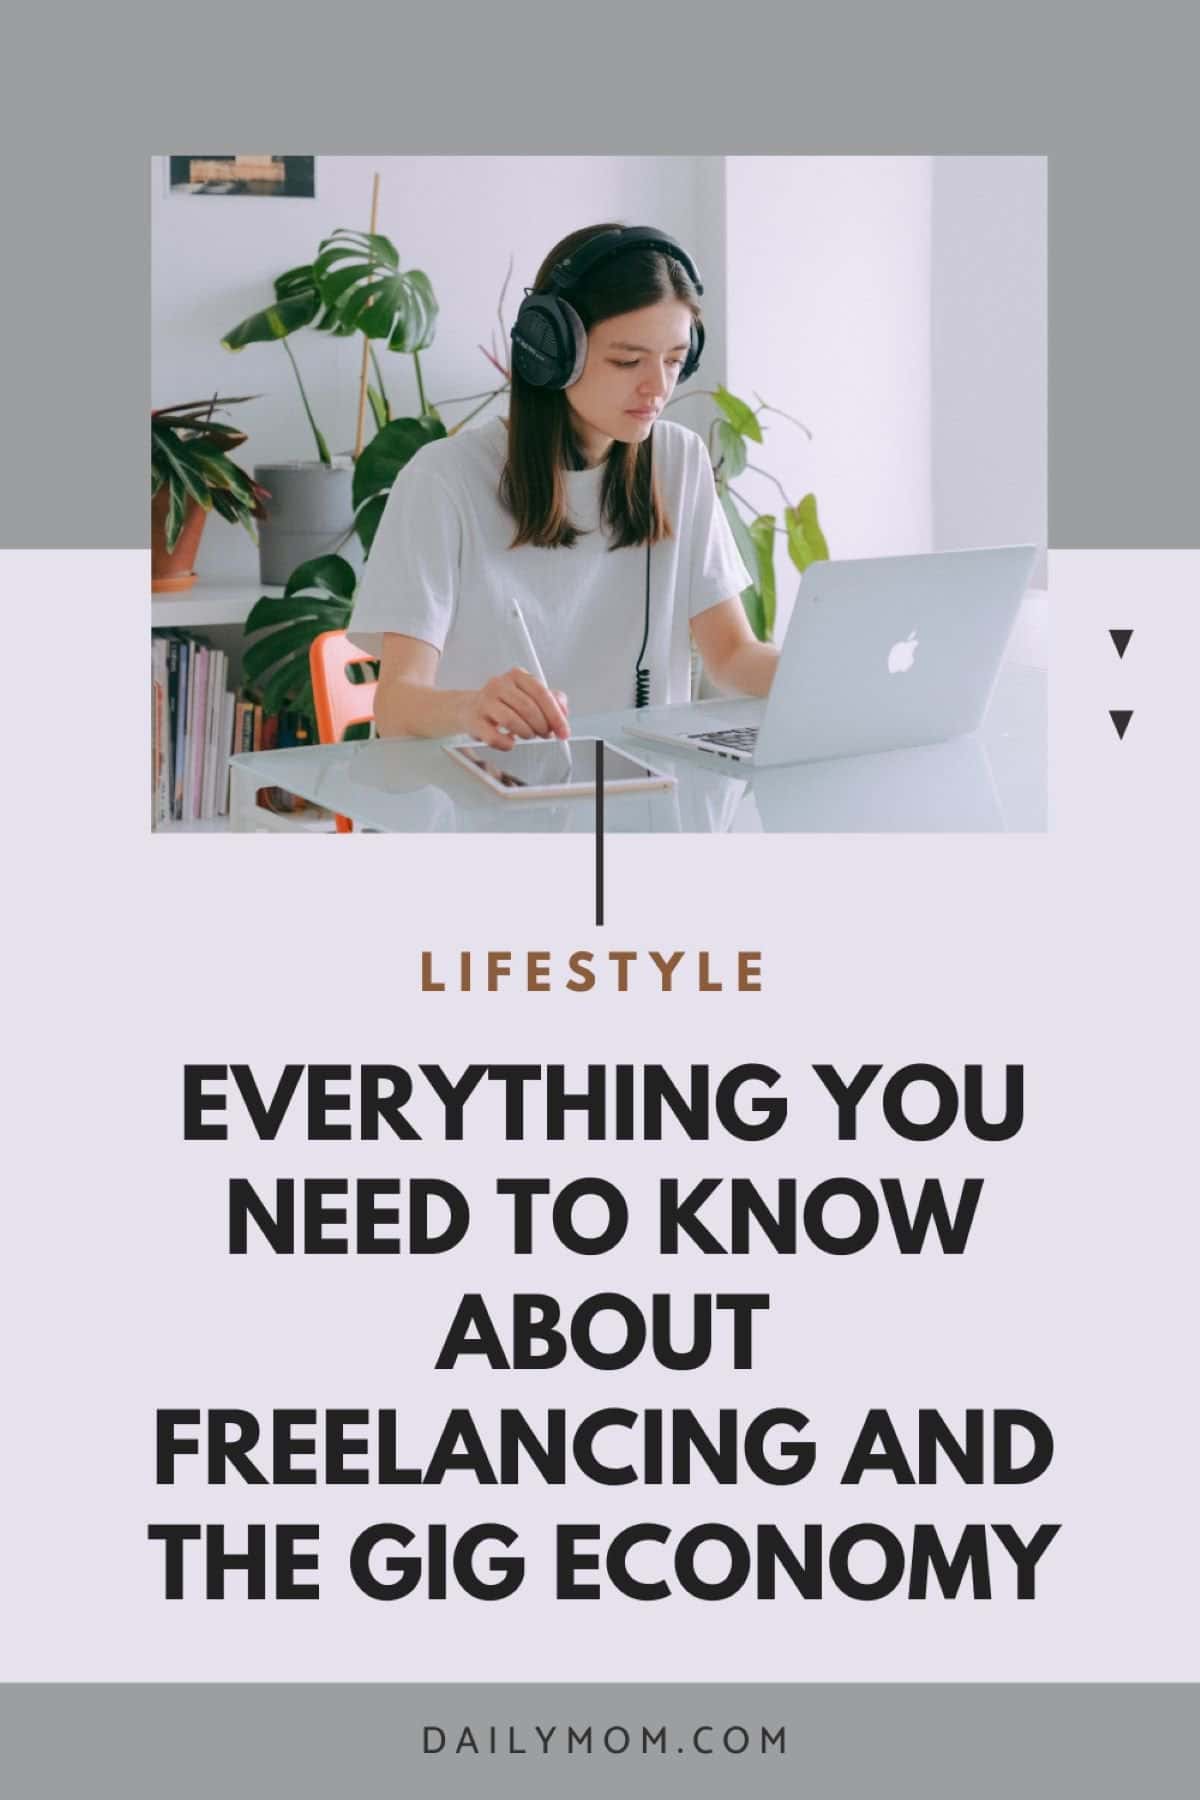 Rise of the Gig Economy and Gig Work: Freelance Definitions and 4 Tips on Becoming a Freelancer 9 Daily Mom, Magazine for Families